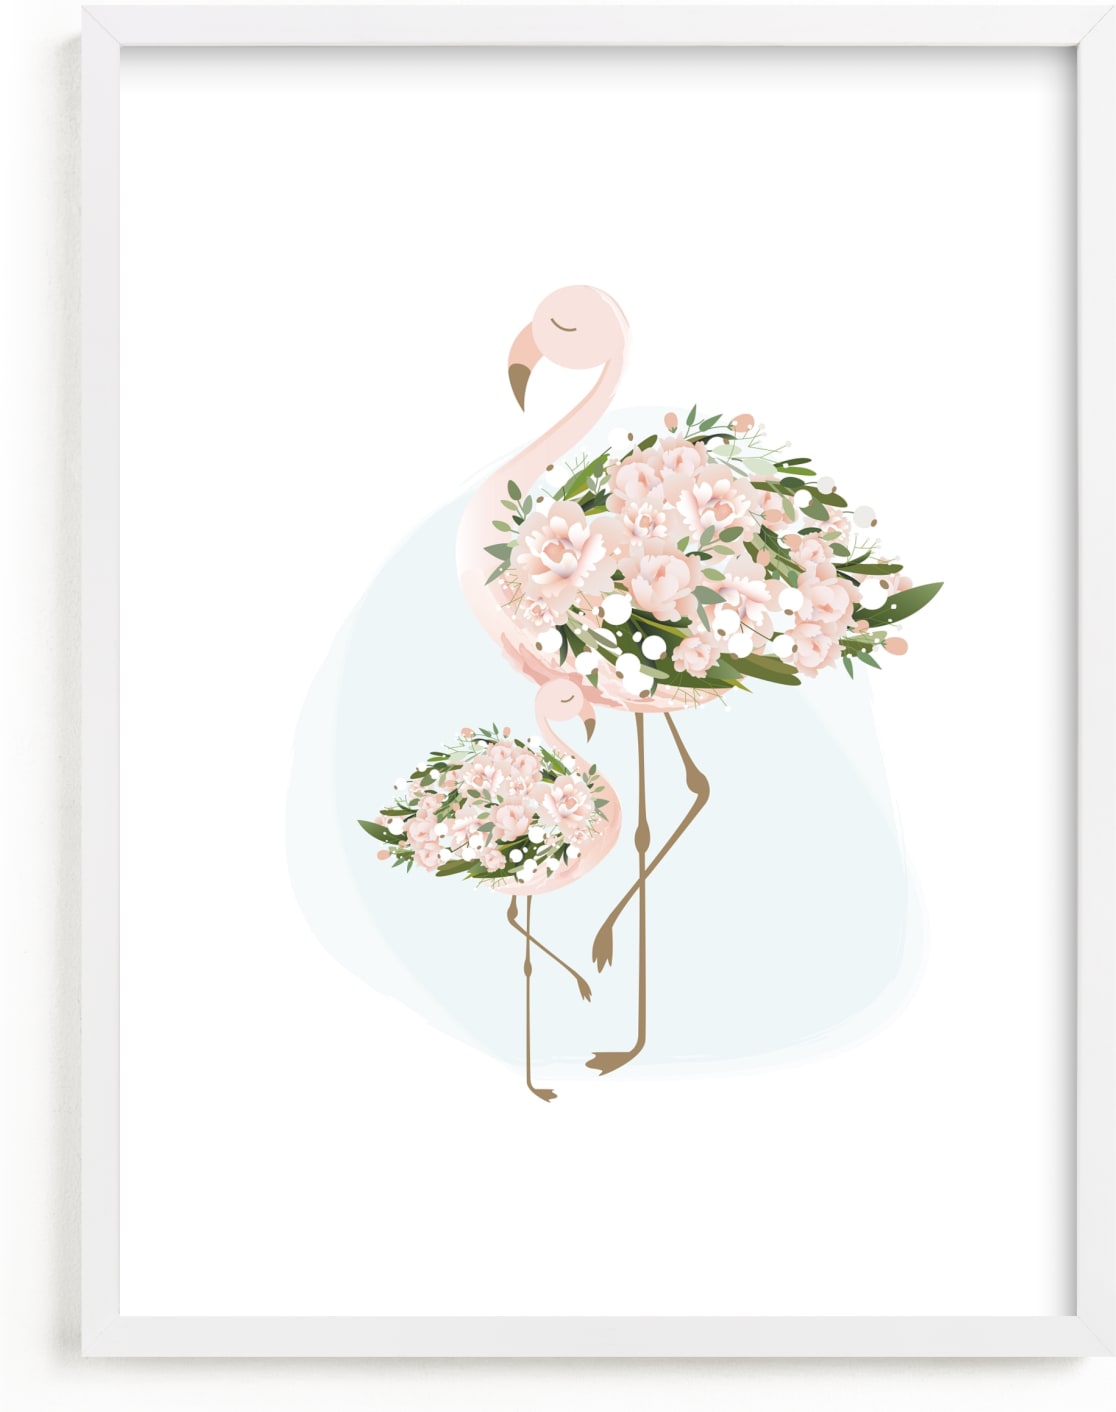 This is a colorful art by Jennifer Postorino called Little Flower Flamingo.